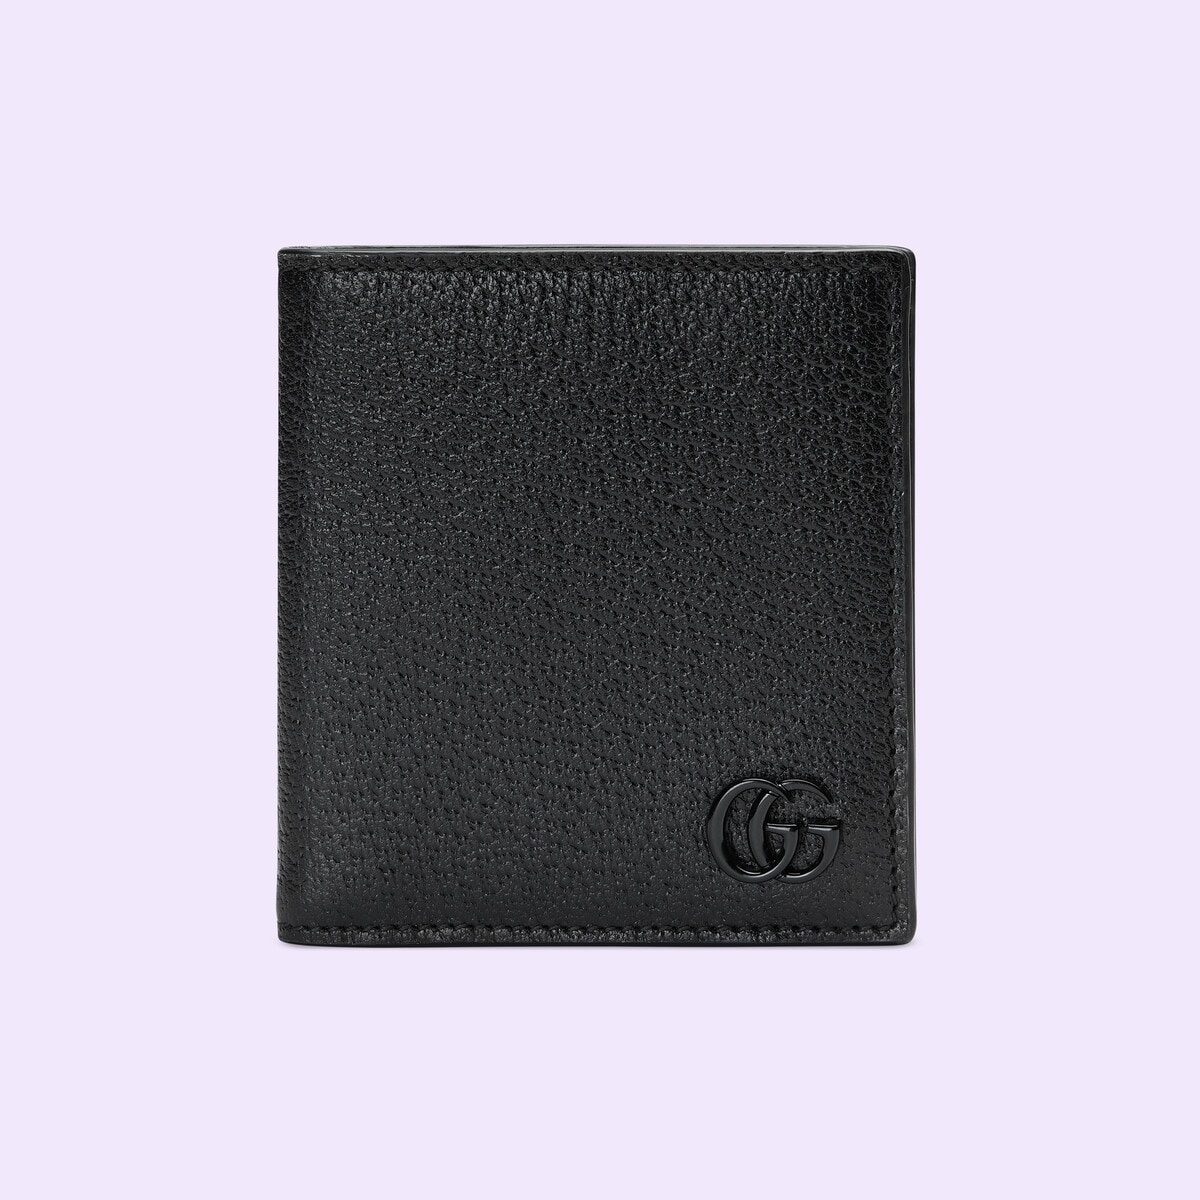 GG Marmont wallet - 1